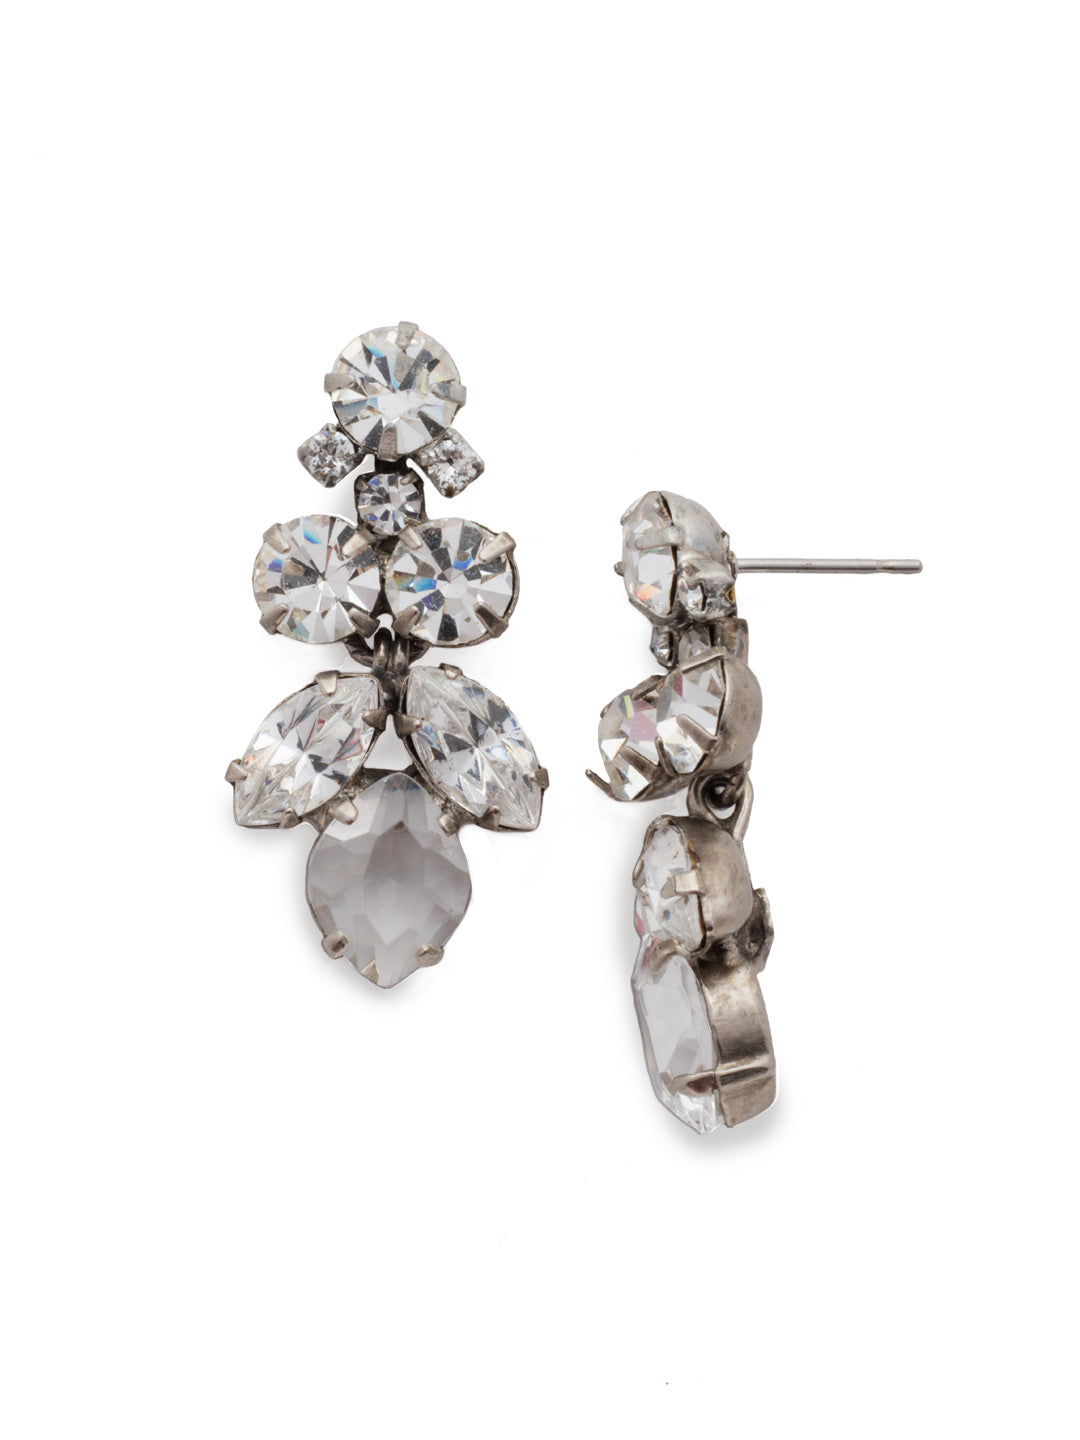 Petite Crystal Lotus Flower Dangle Earrings - EDE79ASCRY - <p>A more petite version of our best-selling statement earring. A sweet formation of crystals hangs comfortably from a post and helps you achieve a glamorous look! From Sorrelli's Crystal collection in our Antique Silver-tone finish.</p>